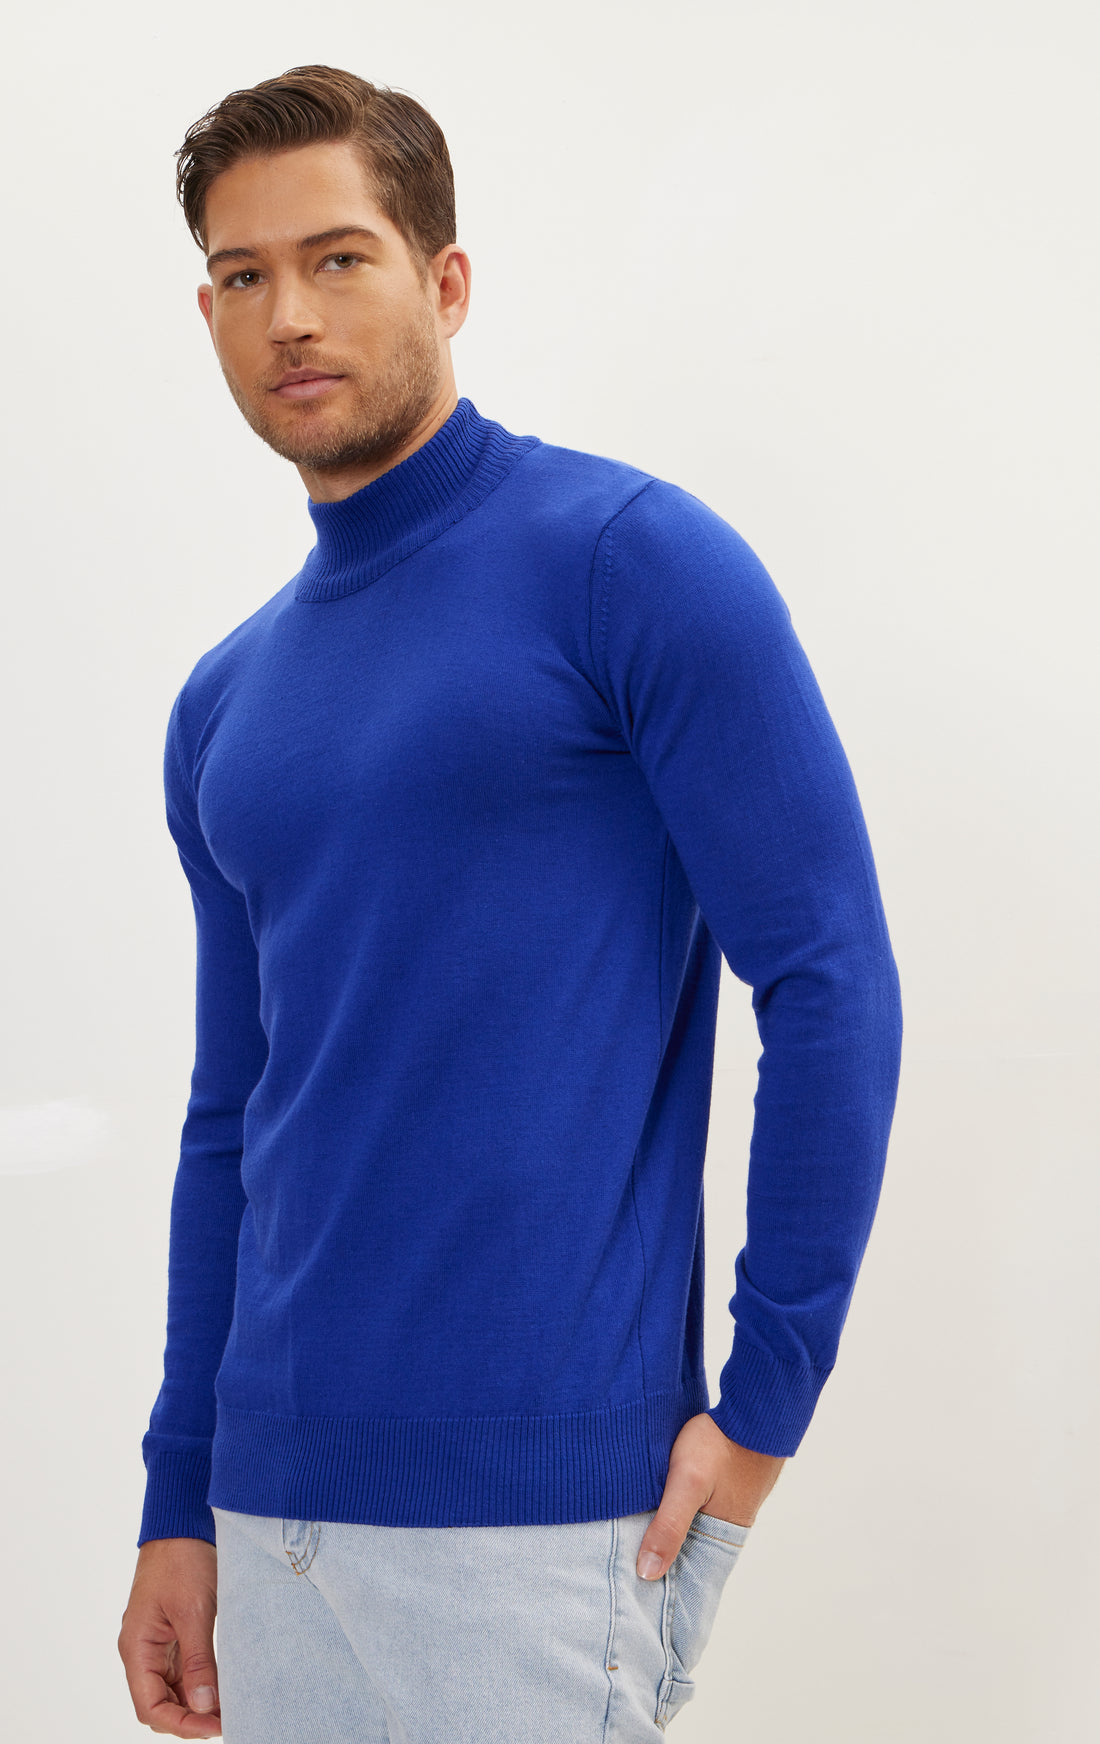 N° 6289 RT MOCK-NECK SWEATER - ELECTRIC BLUE